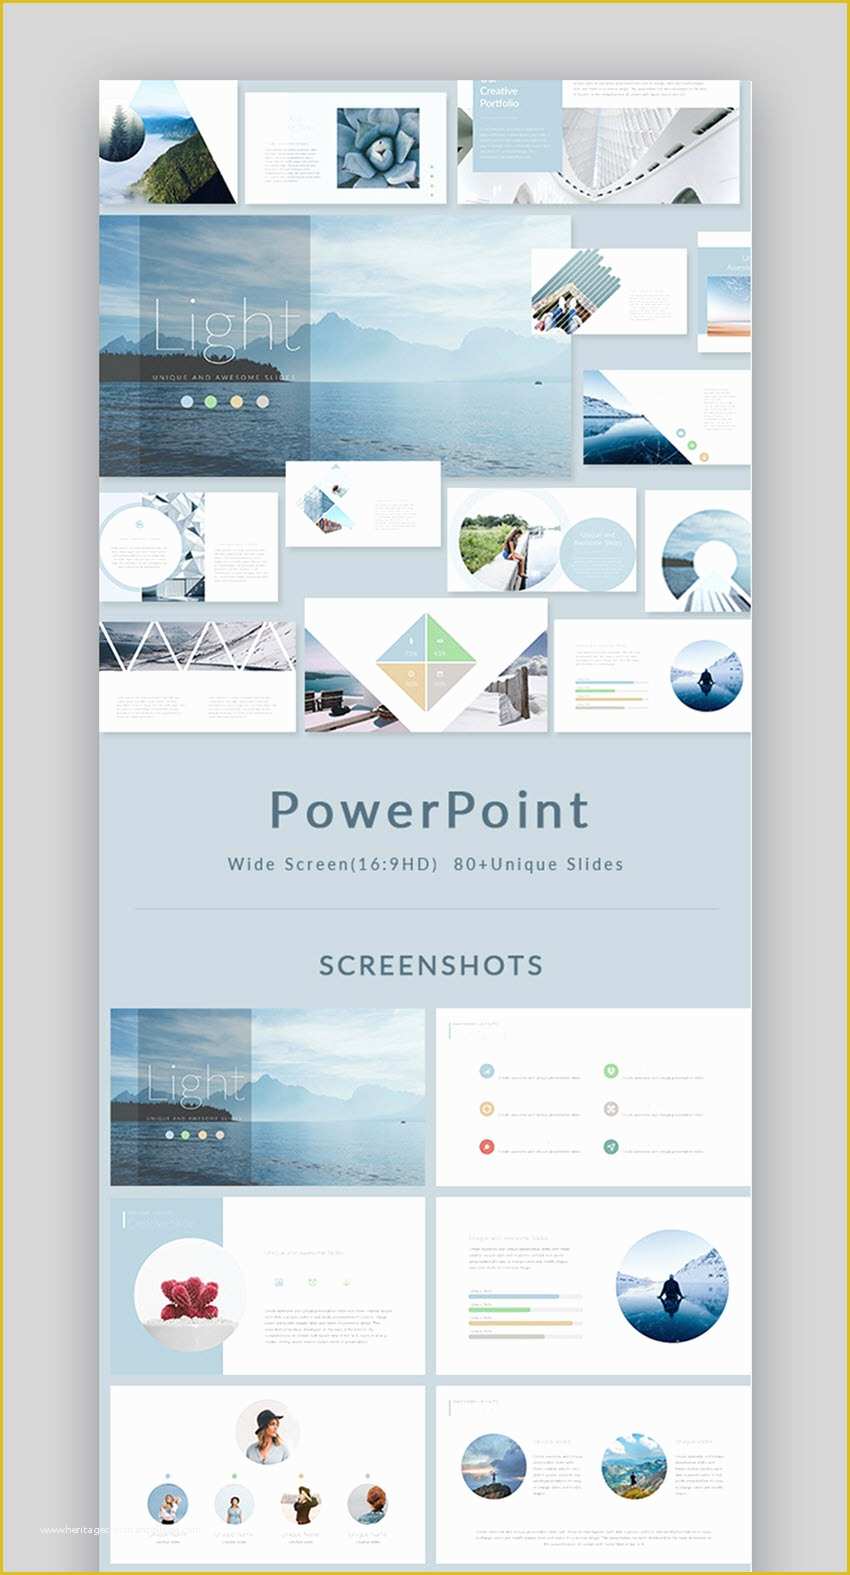 Cool Ppt Templates Free Of 25 Cool Powerpoint Templates to Make Presentations In 2019